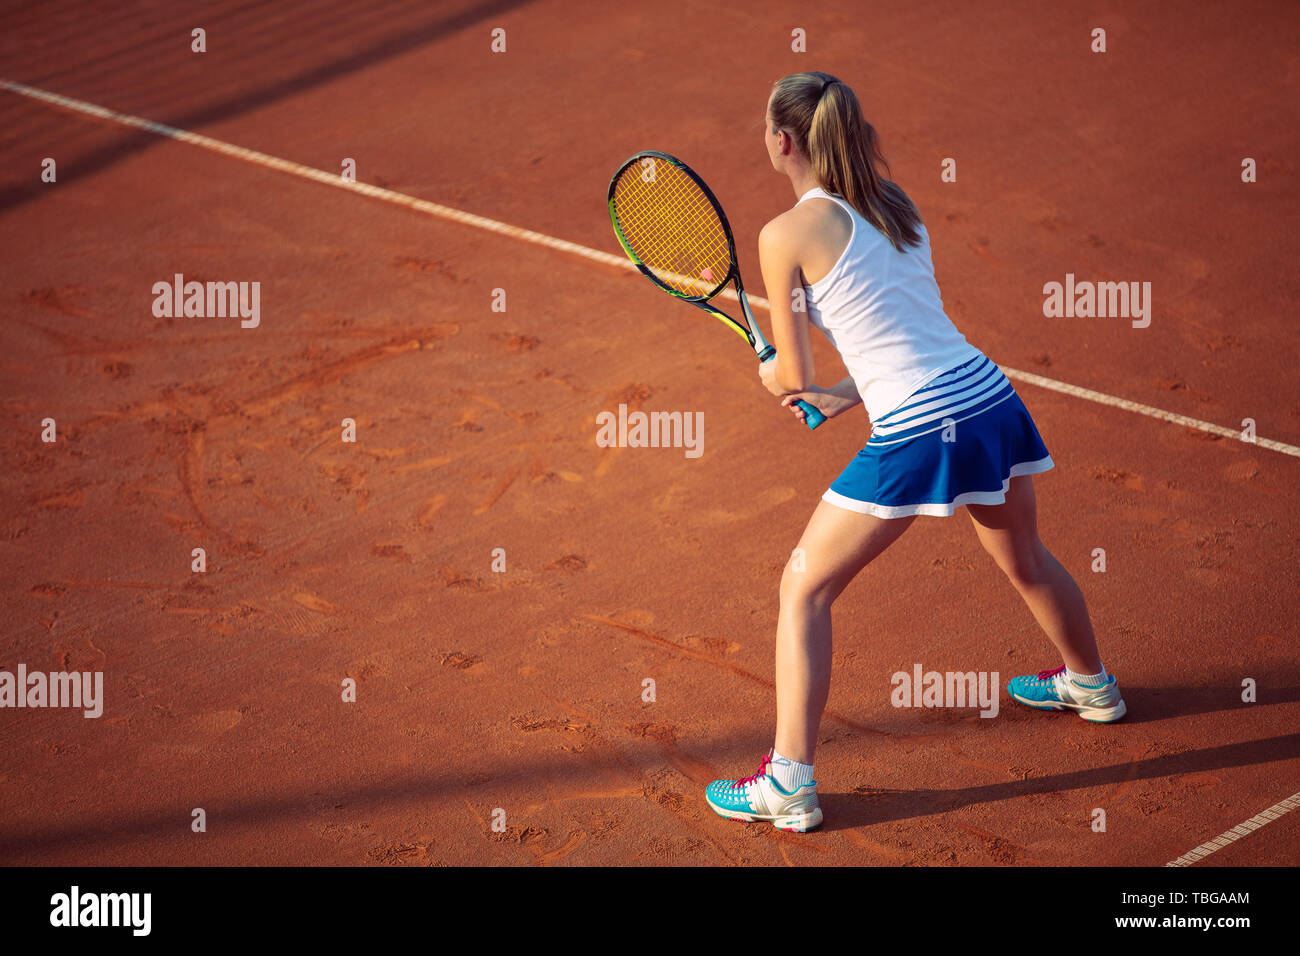 Aerial shot of a female tennis player on a court during match. Young woman playing tennis.High angle view. Stock Photo